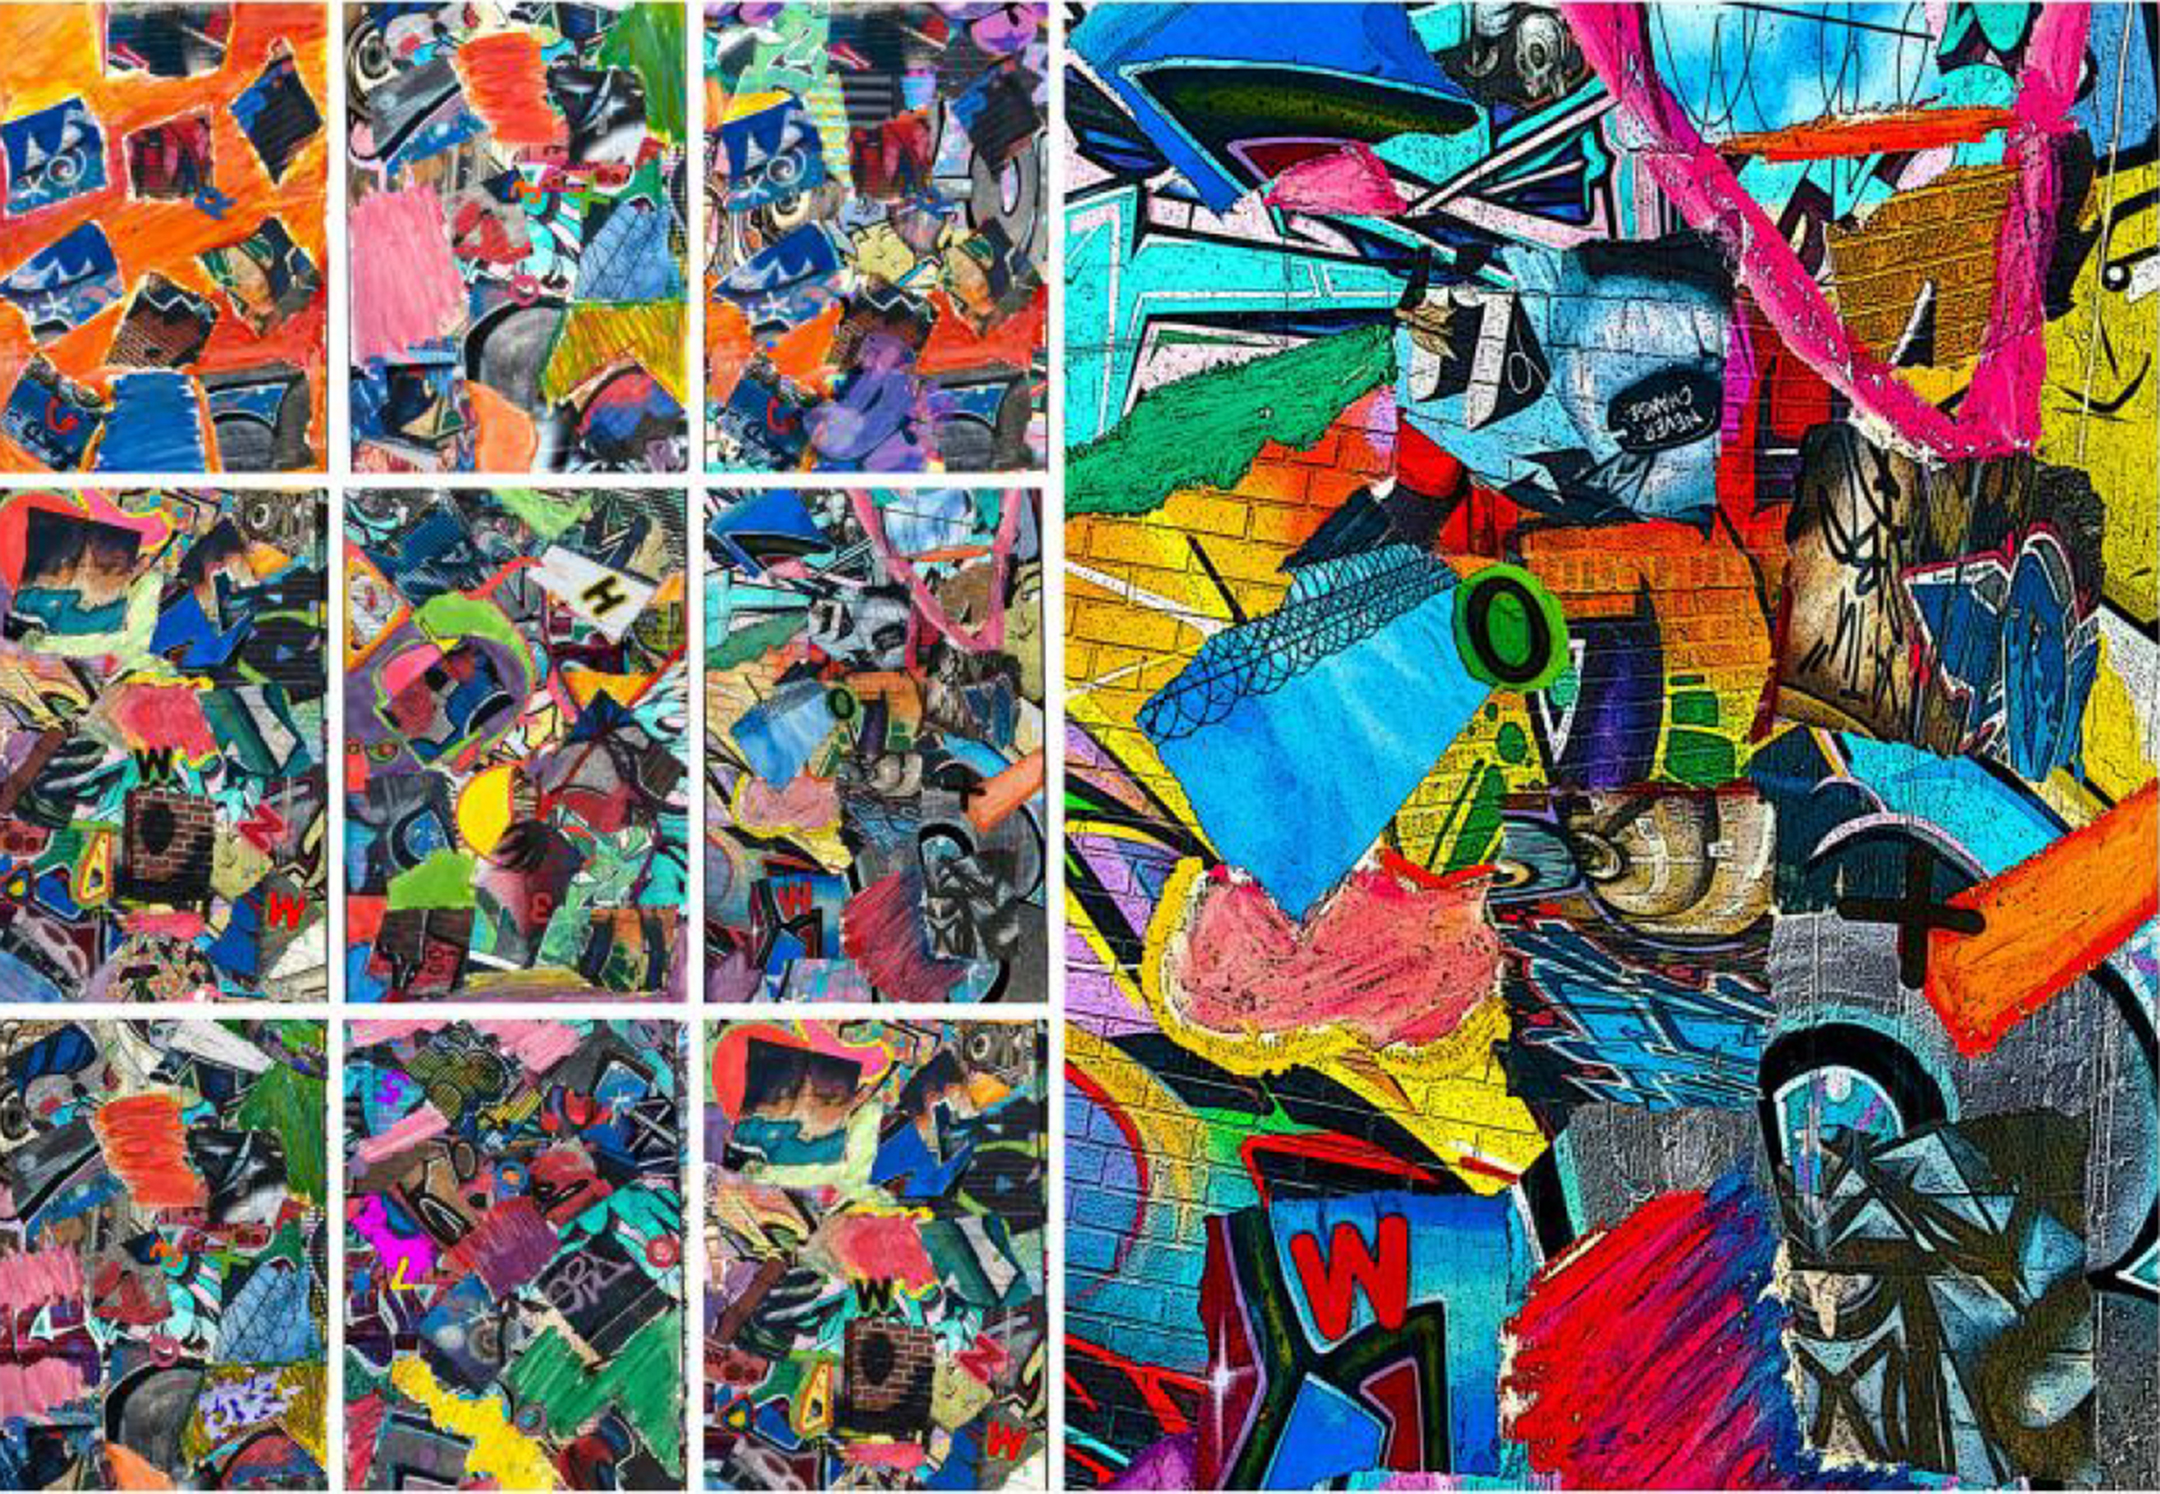 A grid of nine graffiti images, three by three, to the left of a larger panel of graffiti work